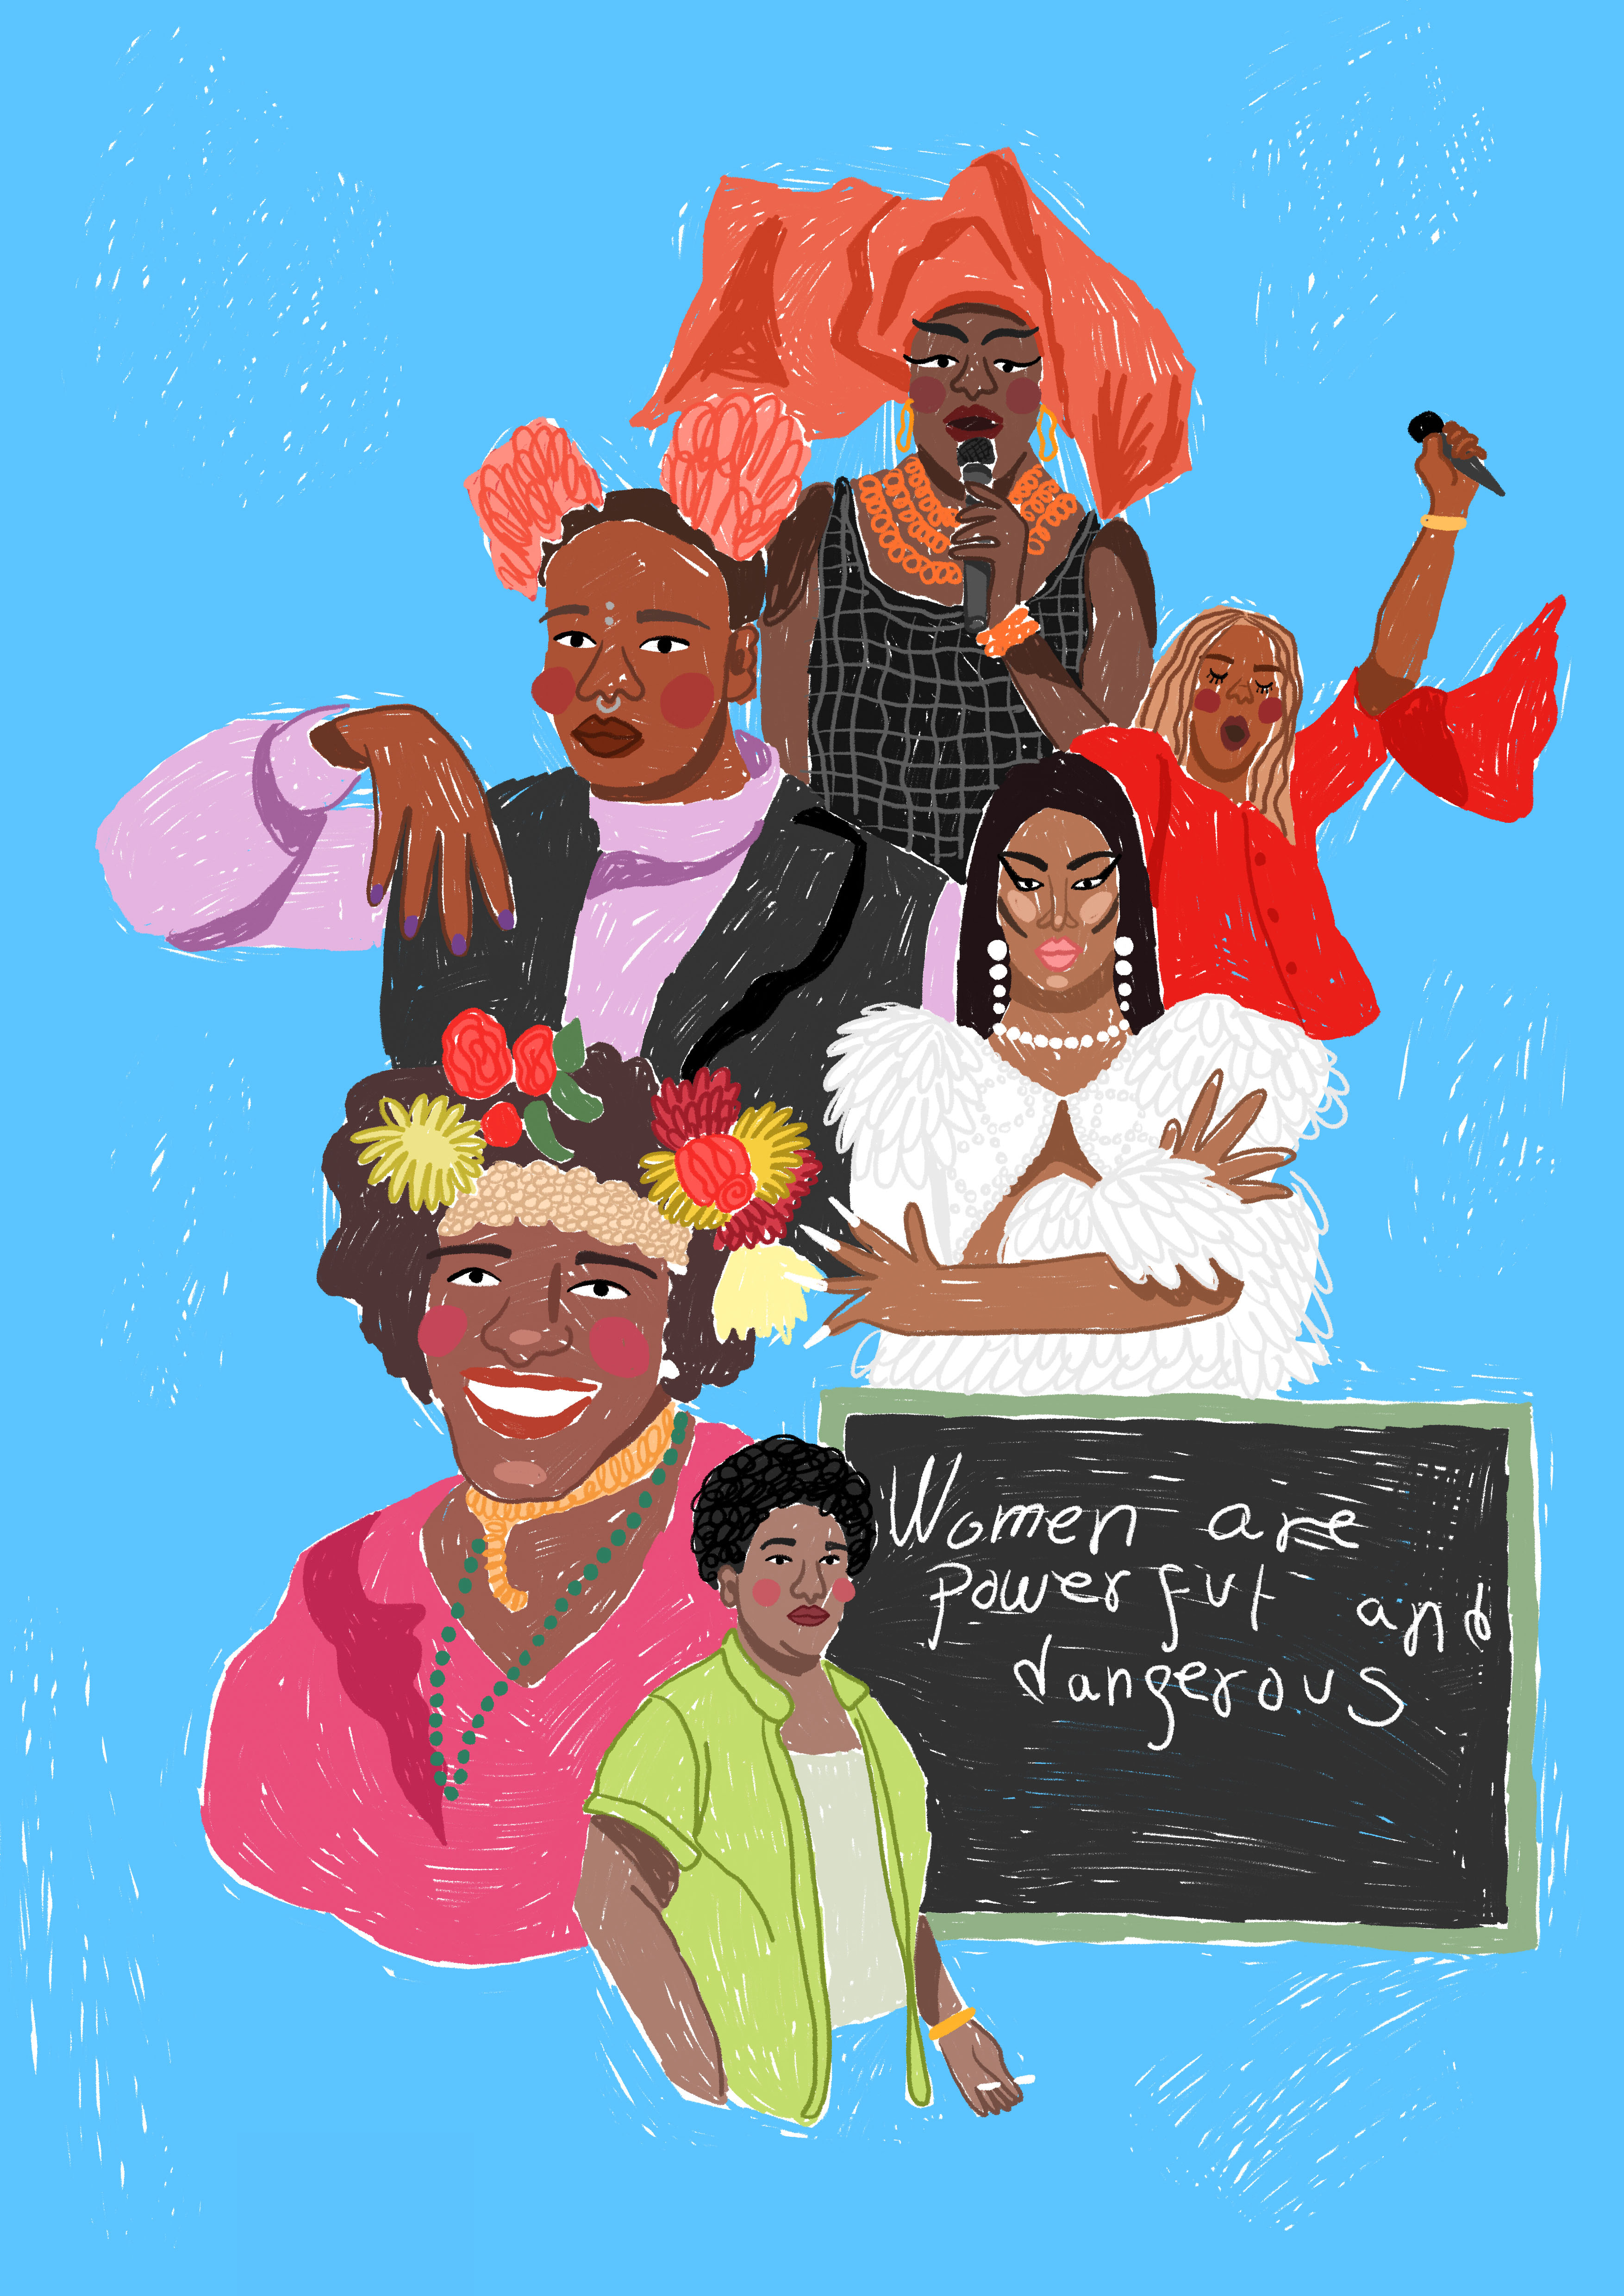 BA Illustration work by Emily Foster showing a group of queer icons, including Marsha P. Johnson, and Tayce, on a bright blue background.